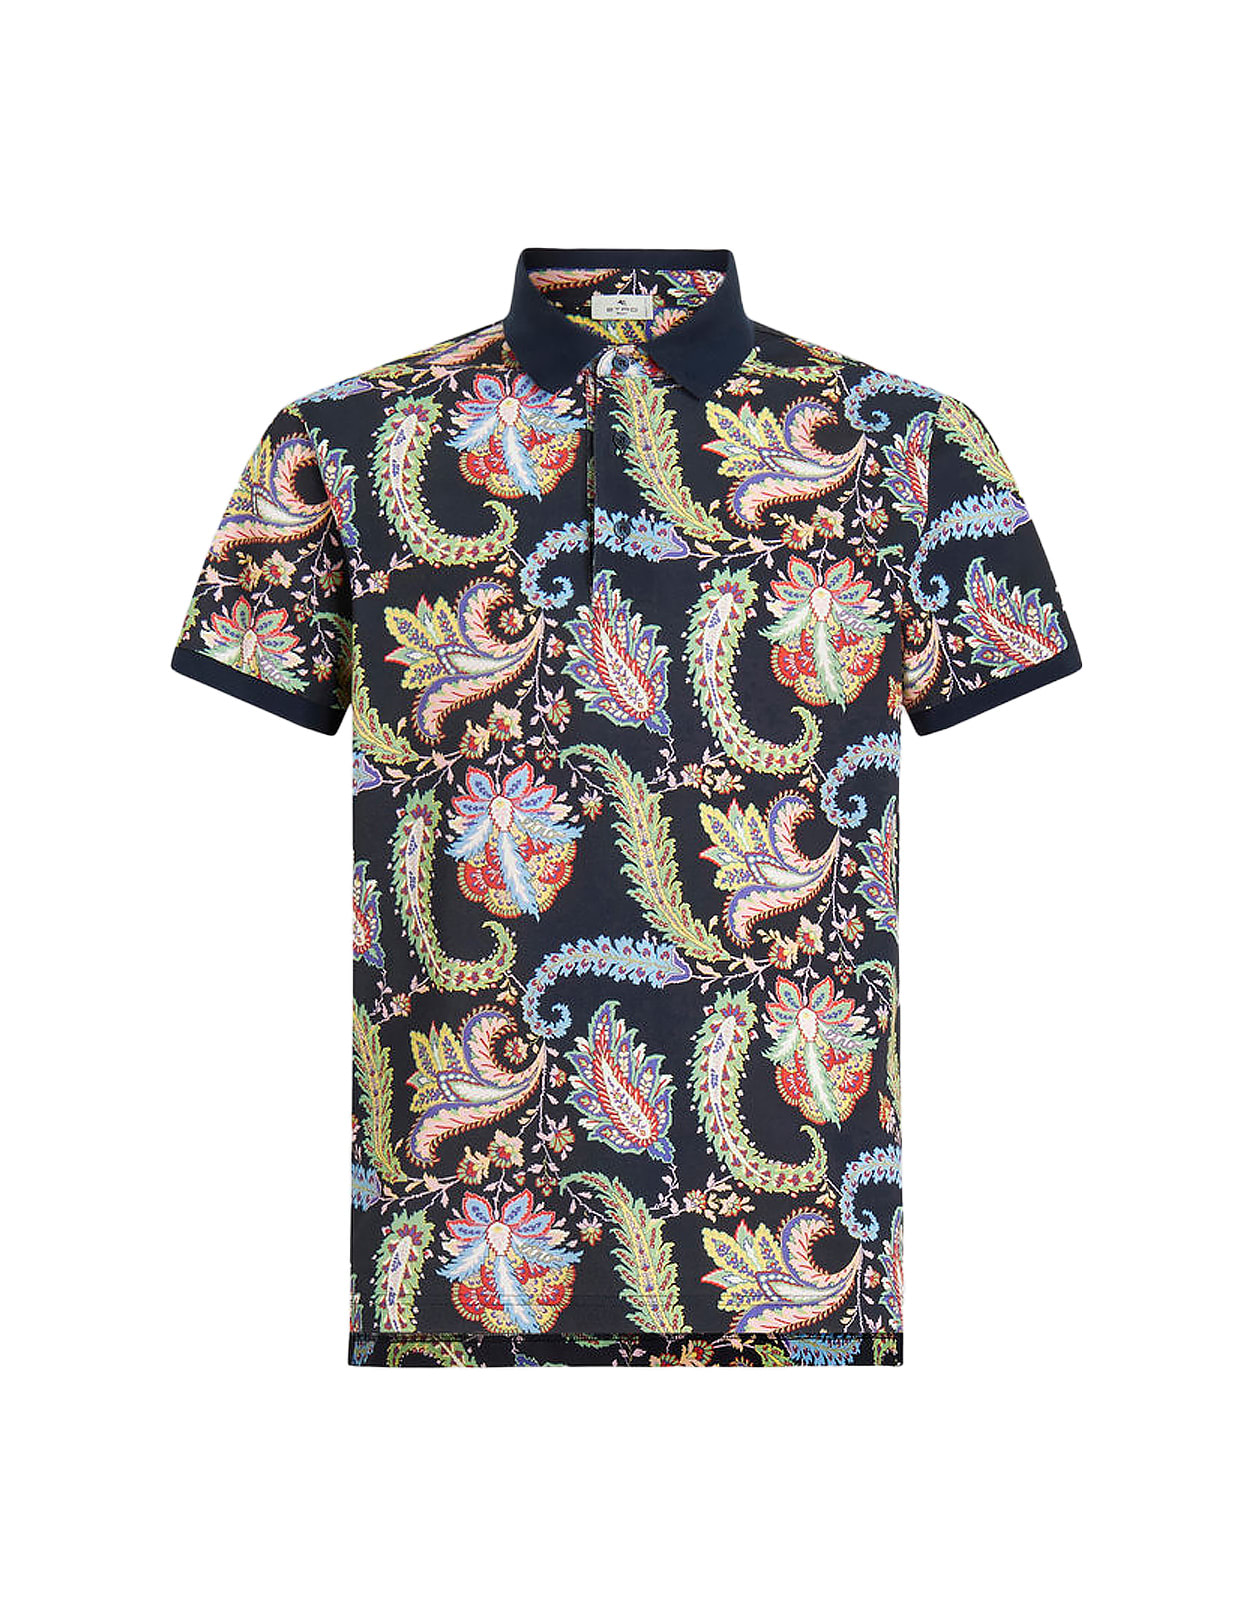 ETRO NAVY BLUE JACQUARD POLO SHIRT WITH FLORAL PAISLEY DESIGNS